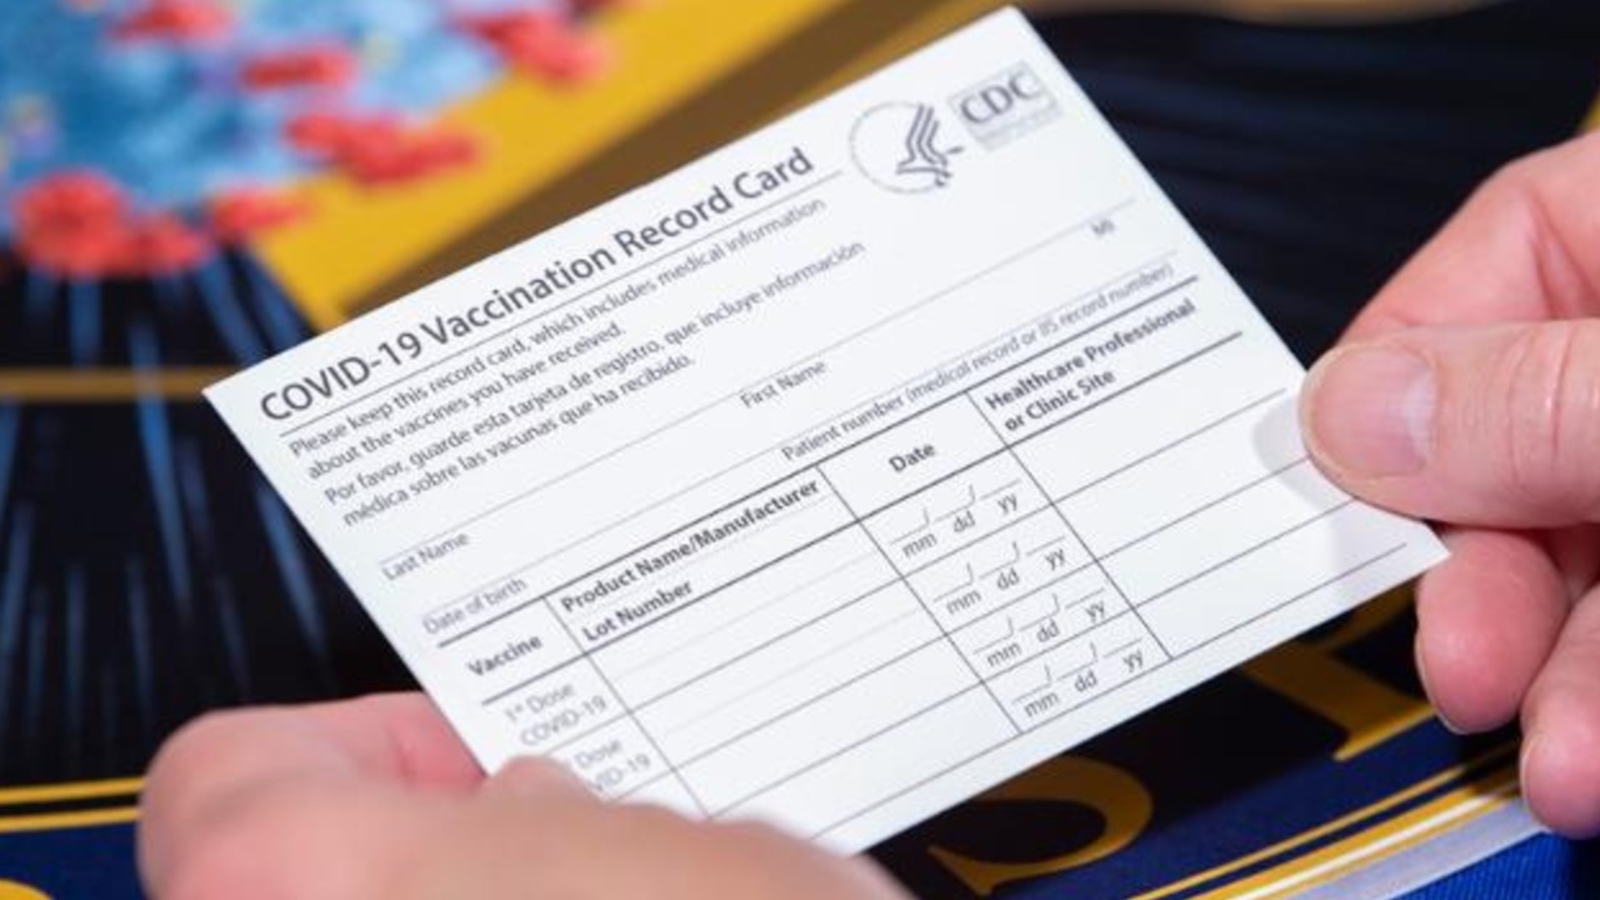 a hand holding a vaccination record card